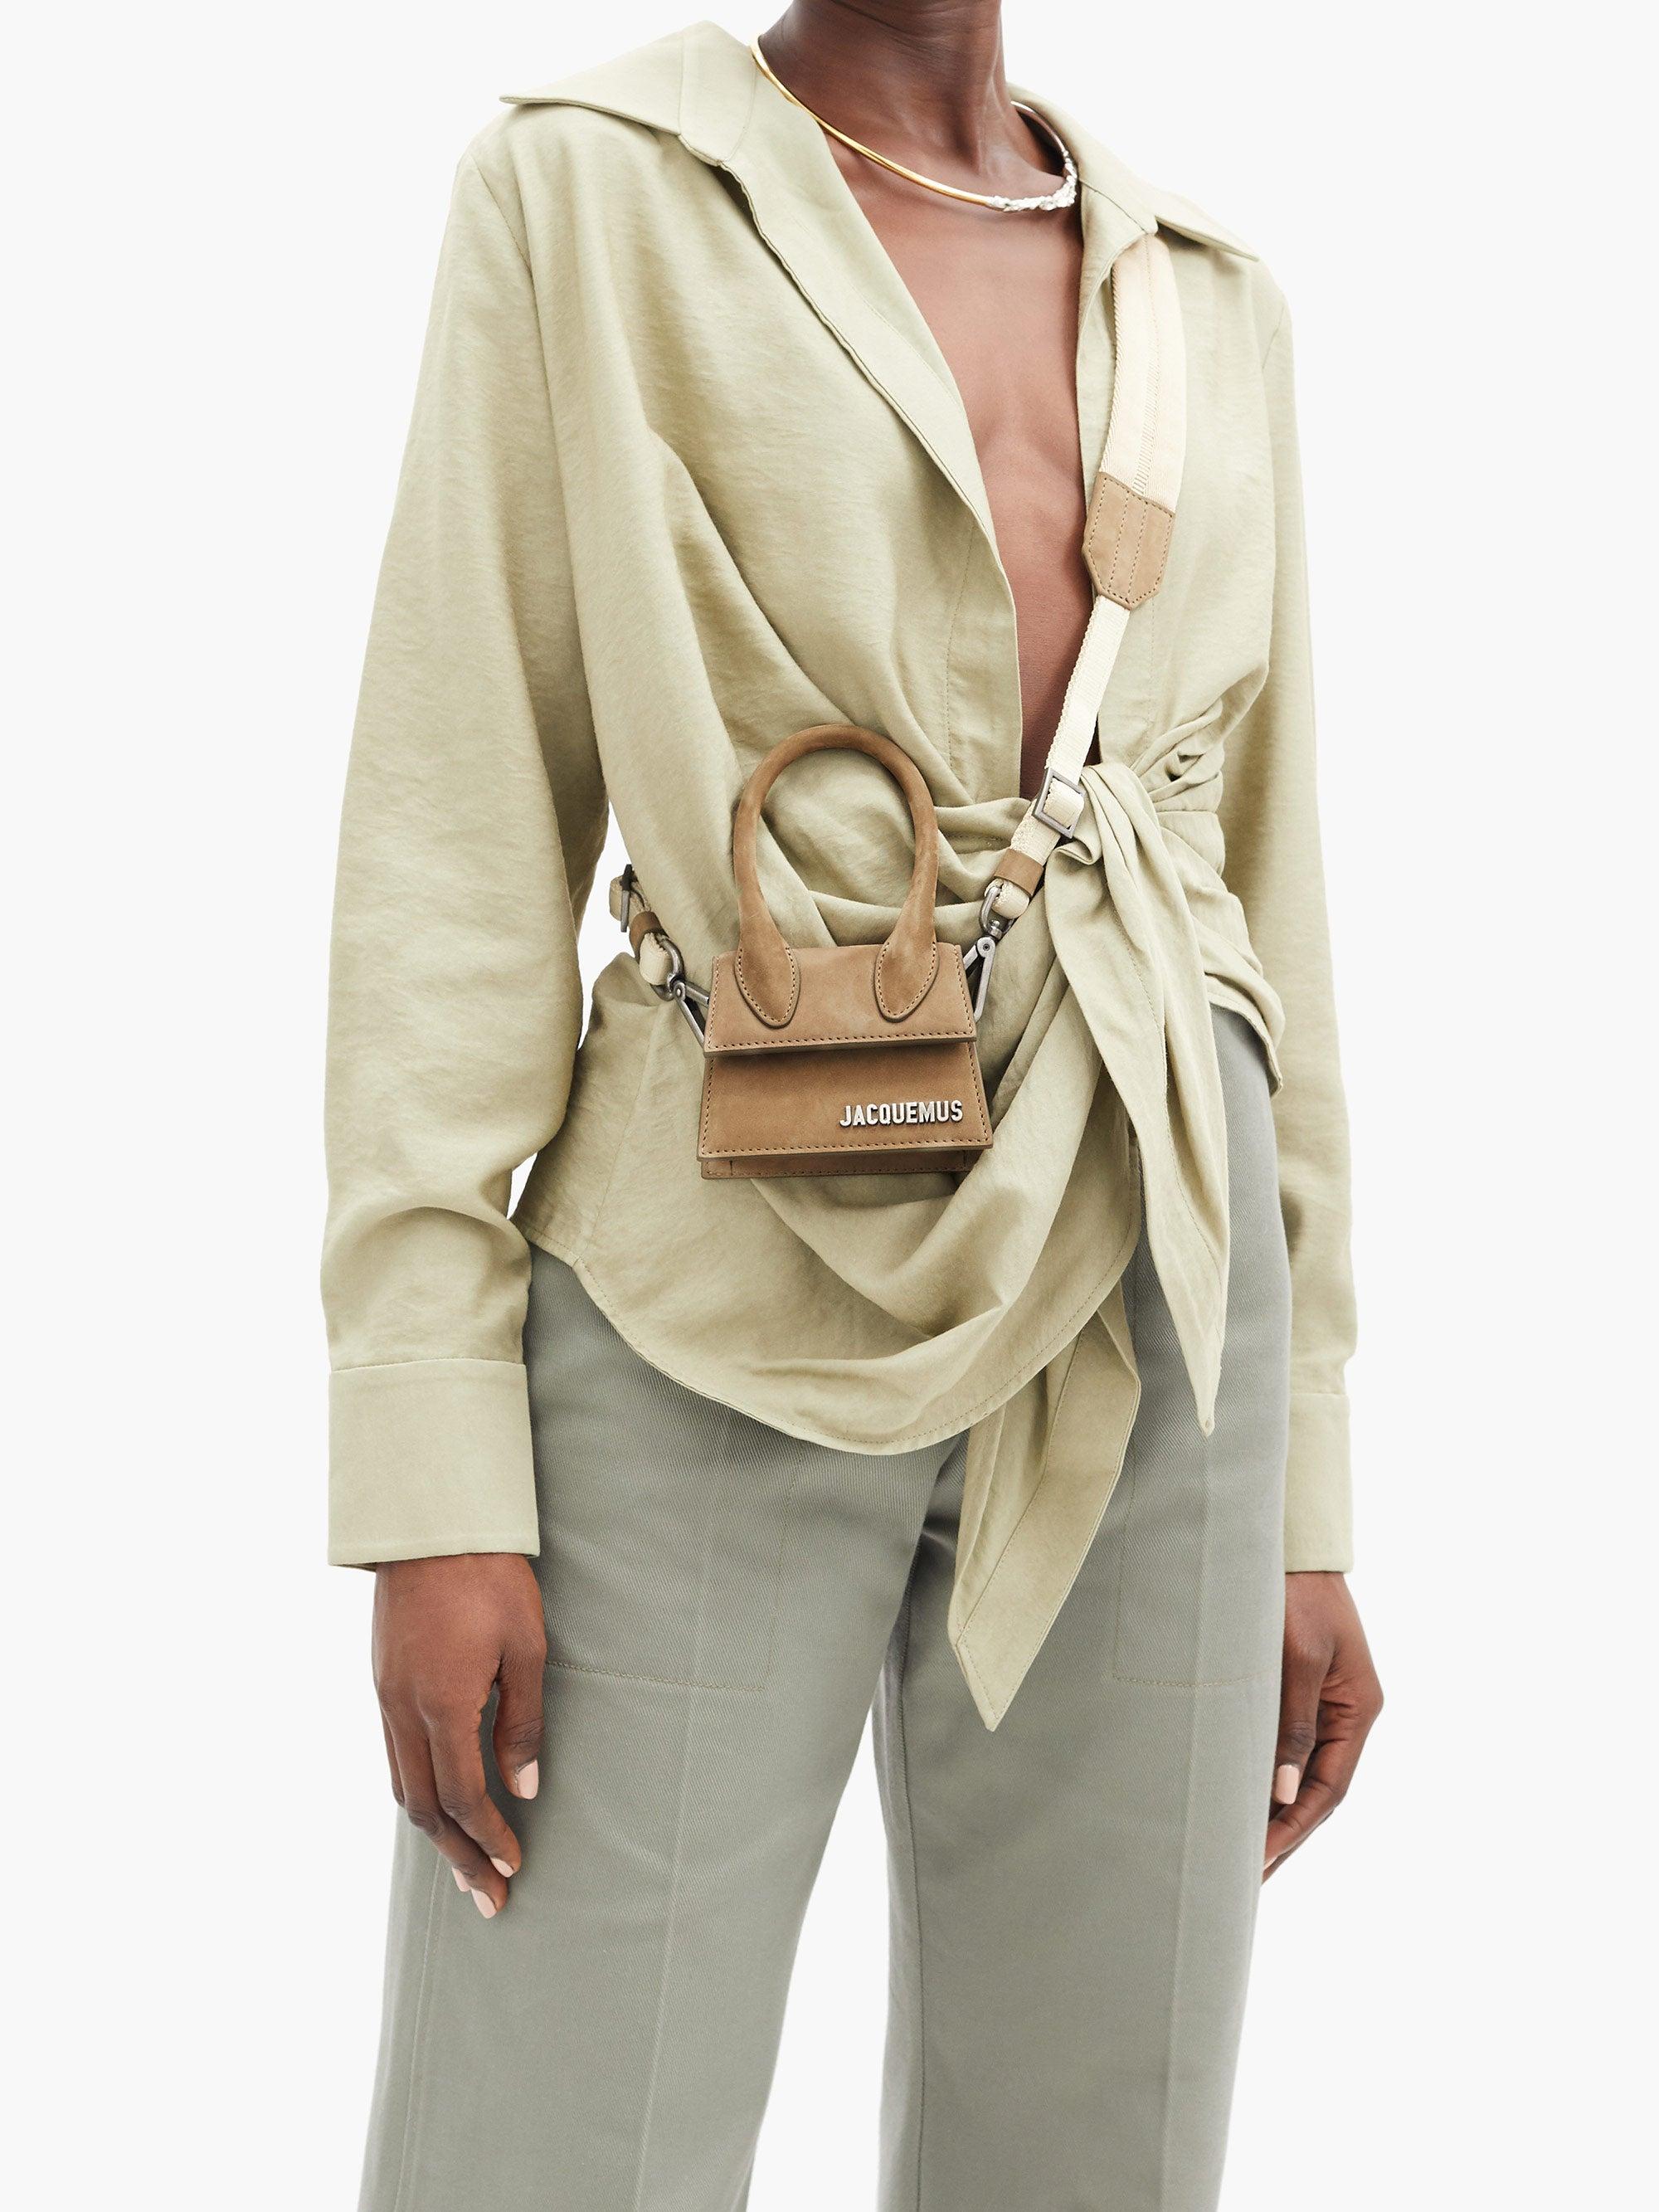 Jacquemus Chiquito Canvas-strap Leather Cross-body Bag in Natural | Lyst